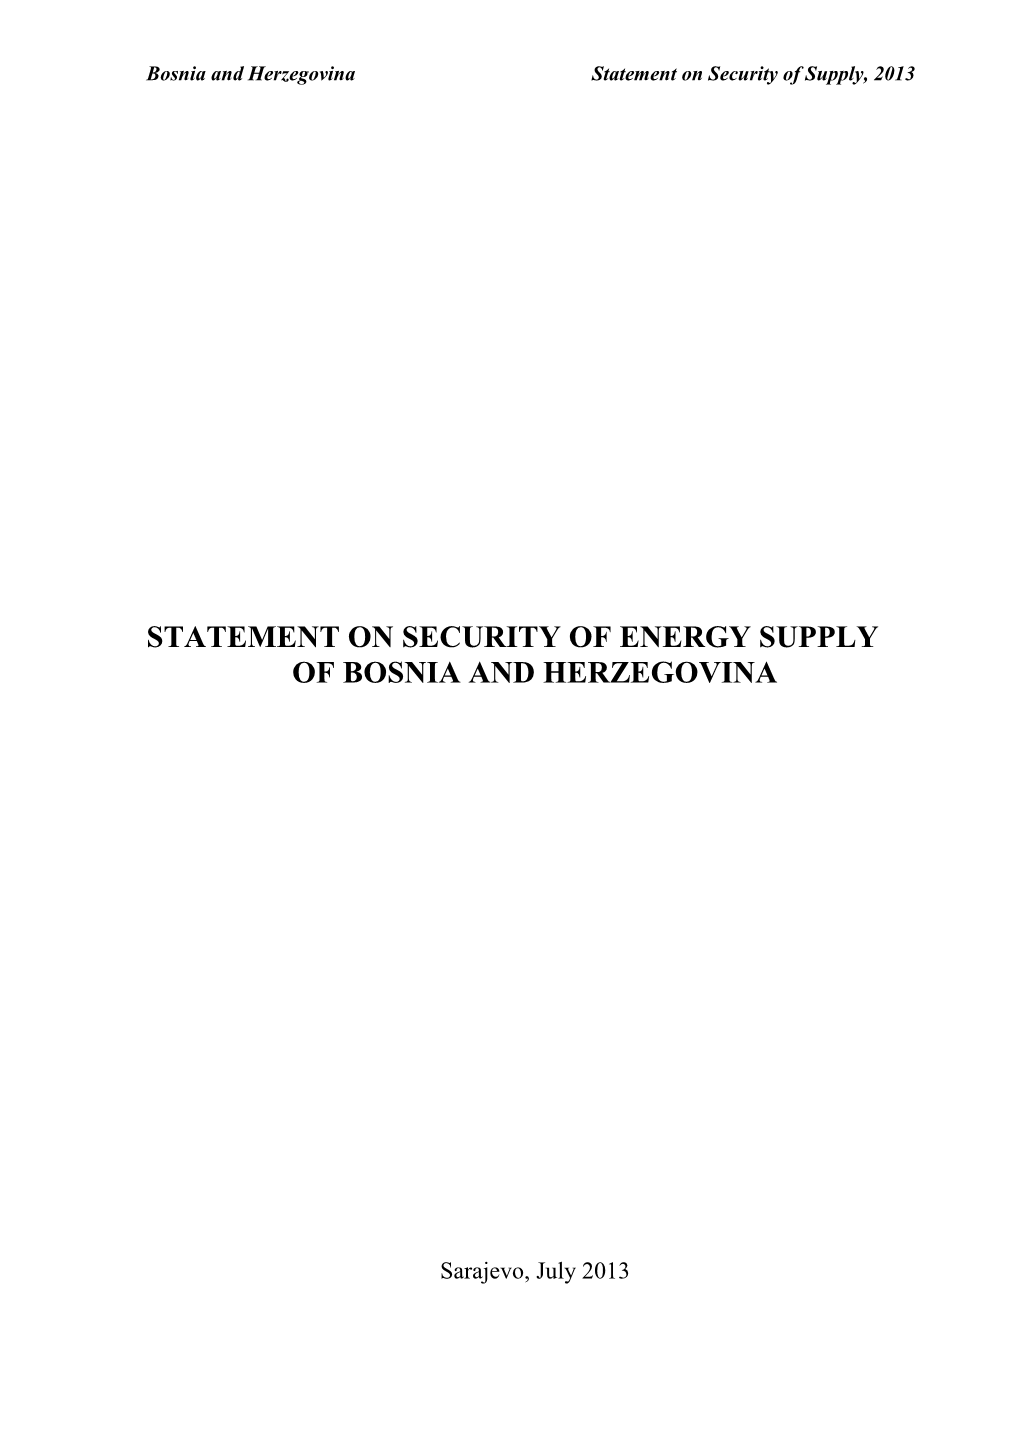 Statement on Security of Energy Supply of Bosnia and Herzegovina